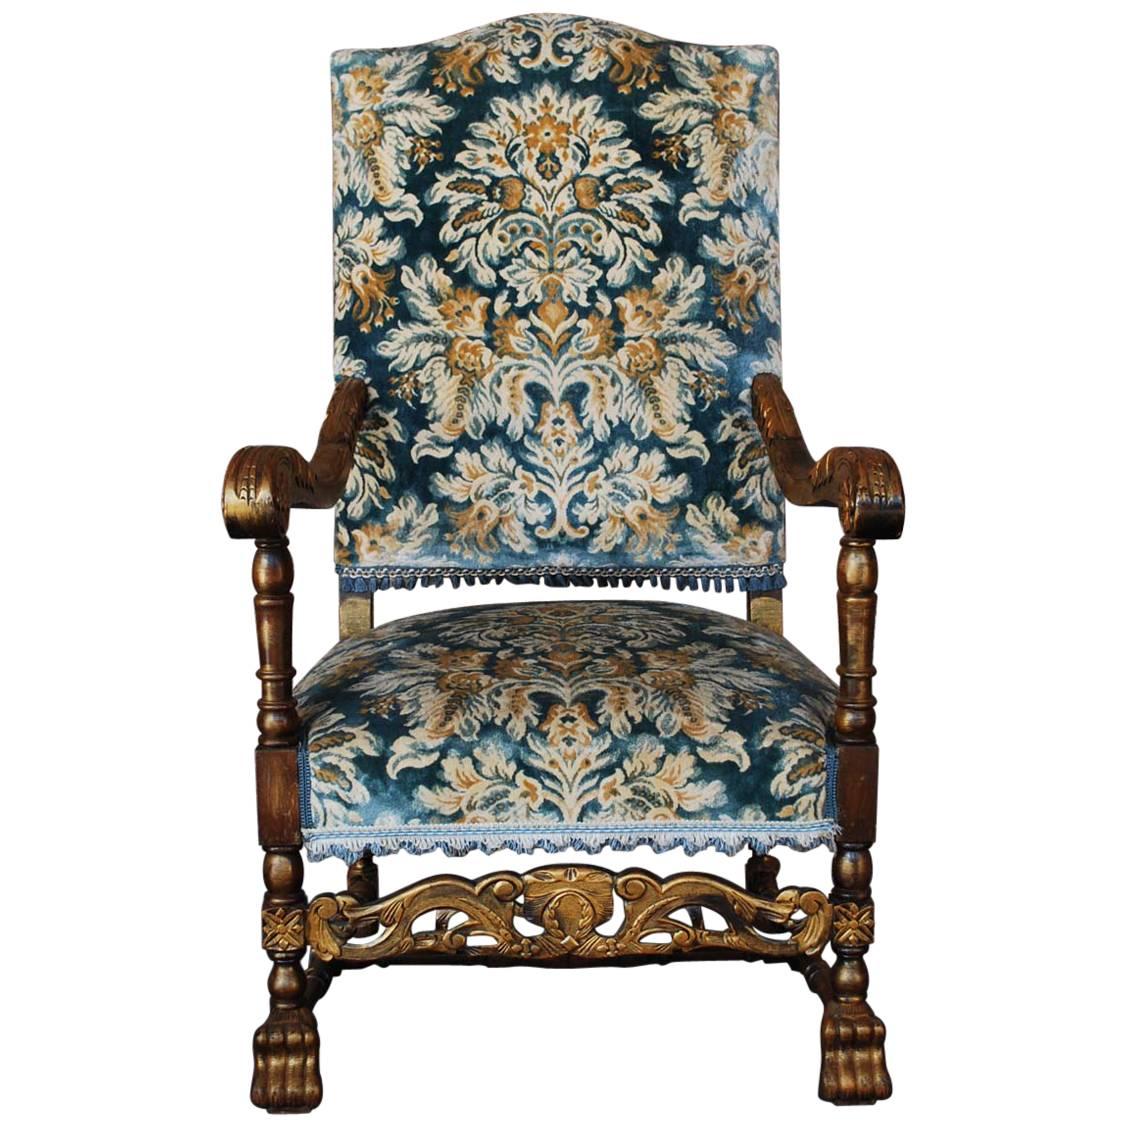 20th Century French Hand-Carved Beechwood Throne Armchair